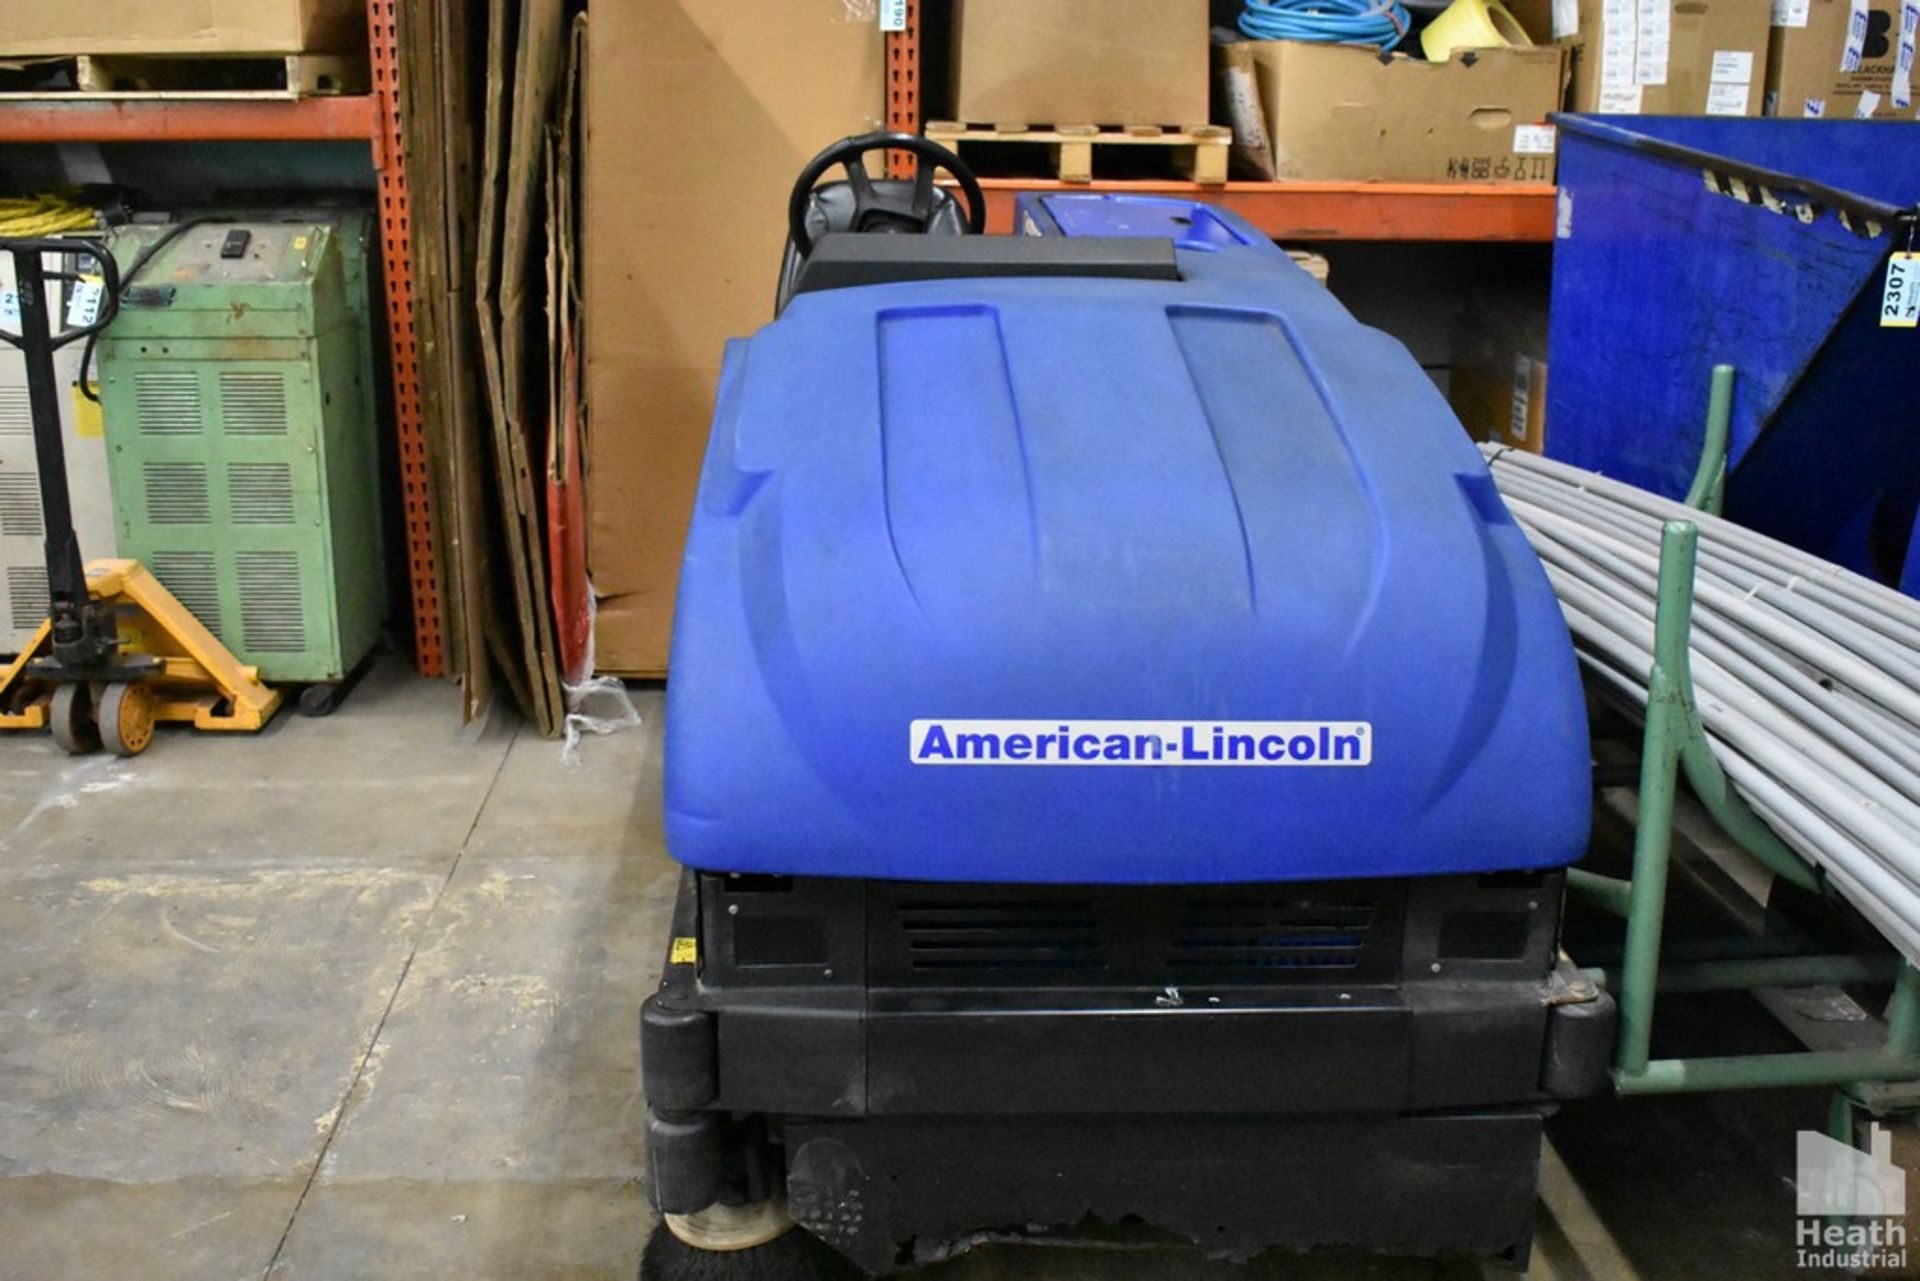 AMERICAN-LINCOLN MODEL 505-322 ELECTRIC FLOOR SWEEPER, 36 VOLT, S/N 692120, LENGTH 8'', WIDTH 4' - Image 2 of 10